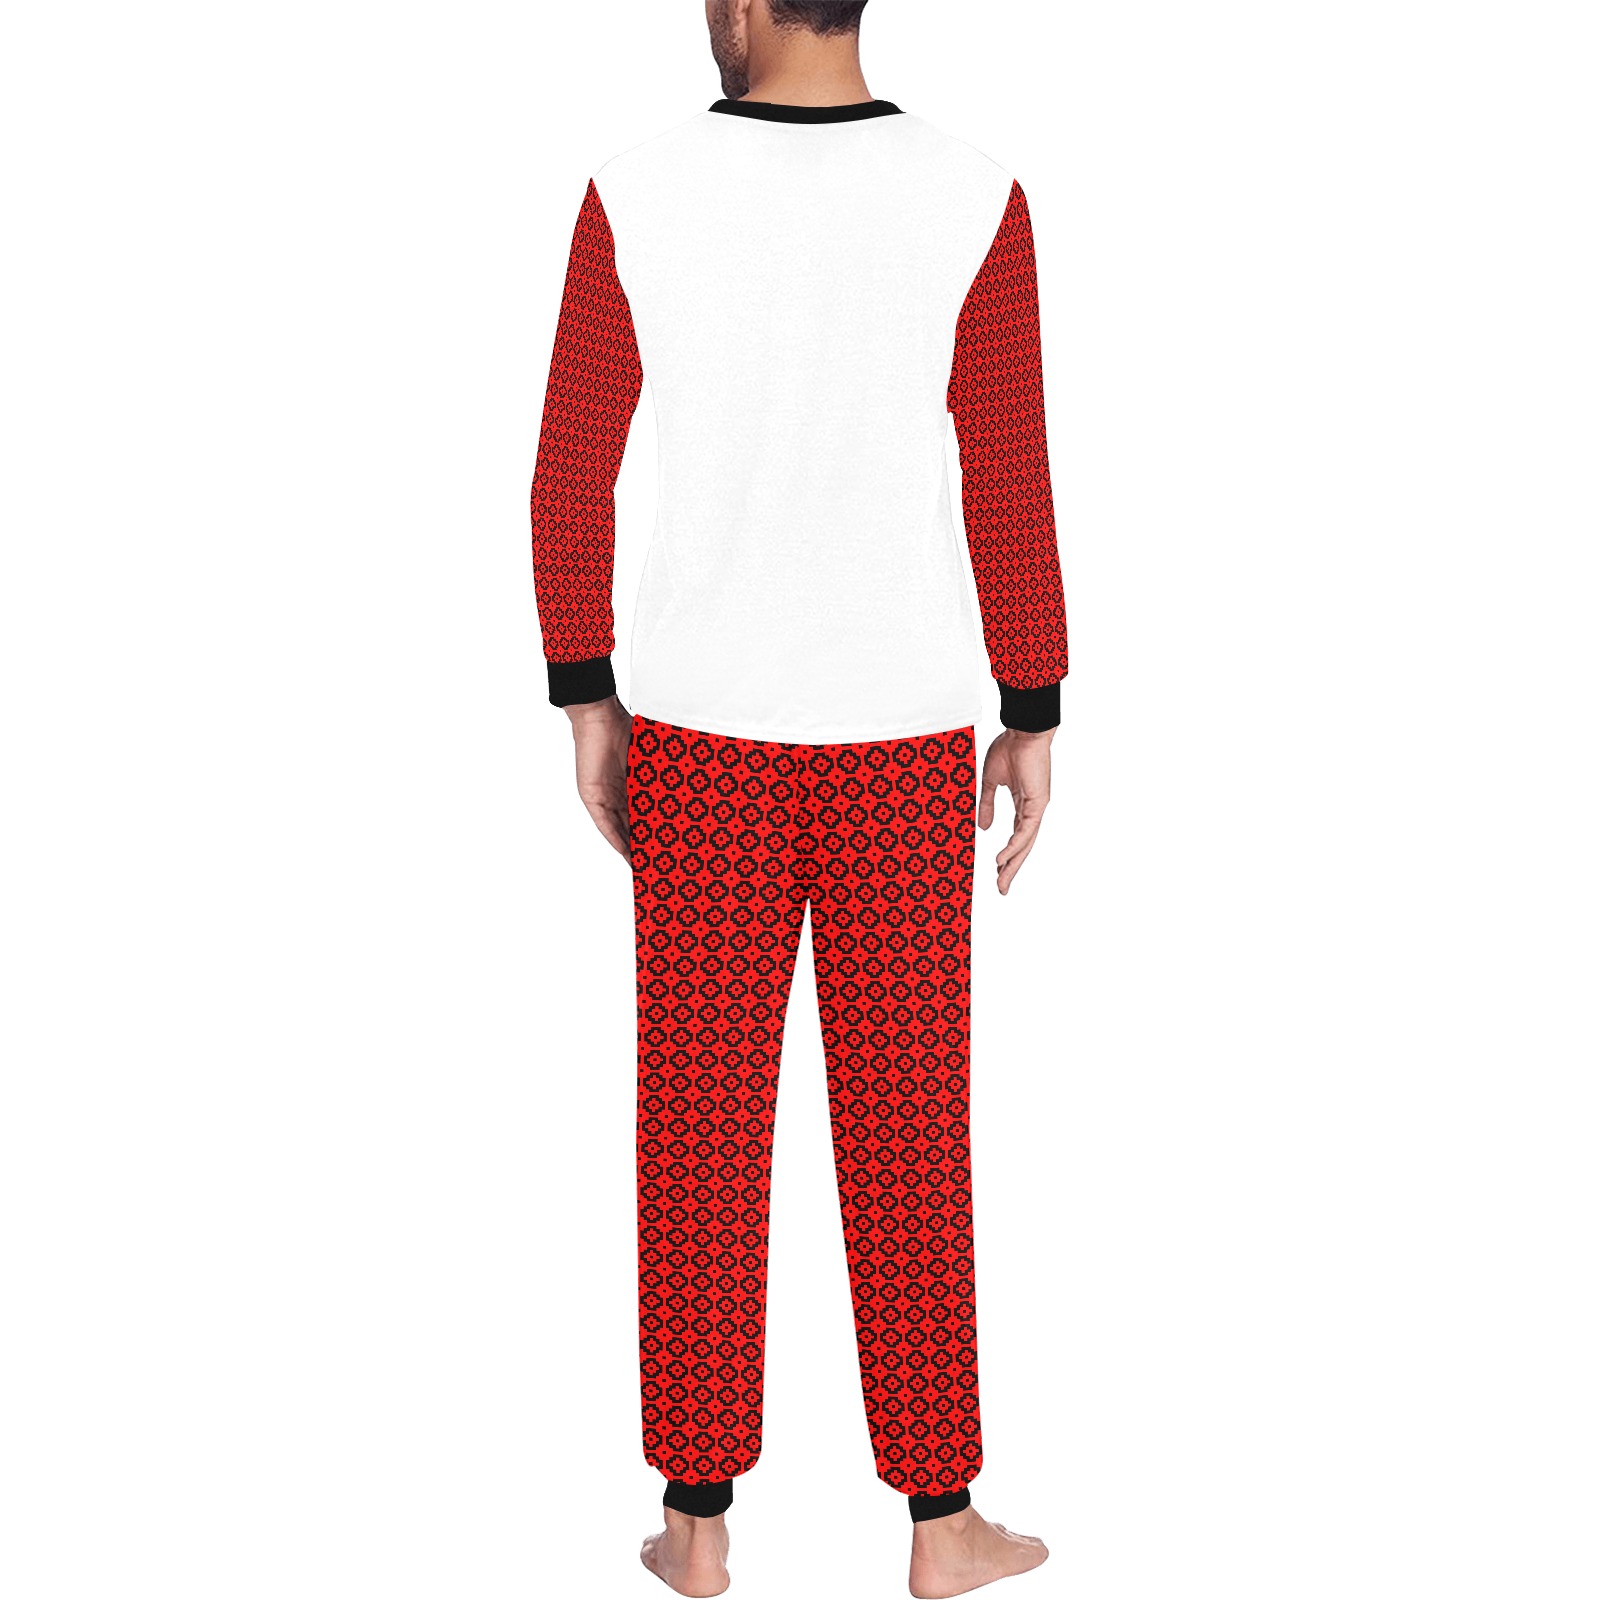 Most Likely to Eat Santa's Cookies Men's All Over Print Pajama Set